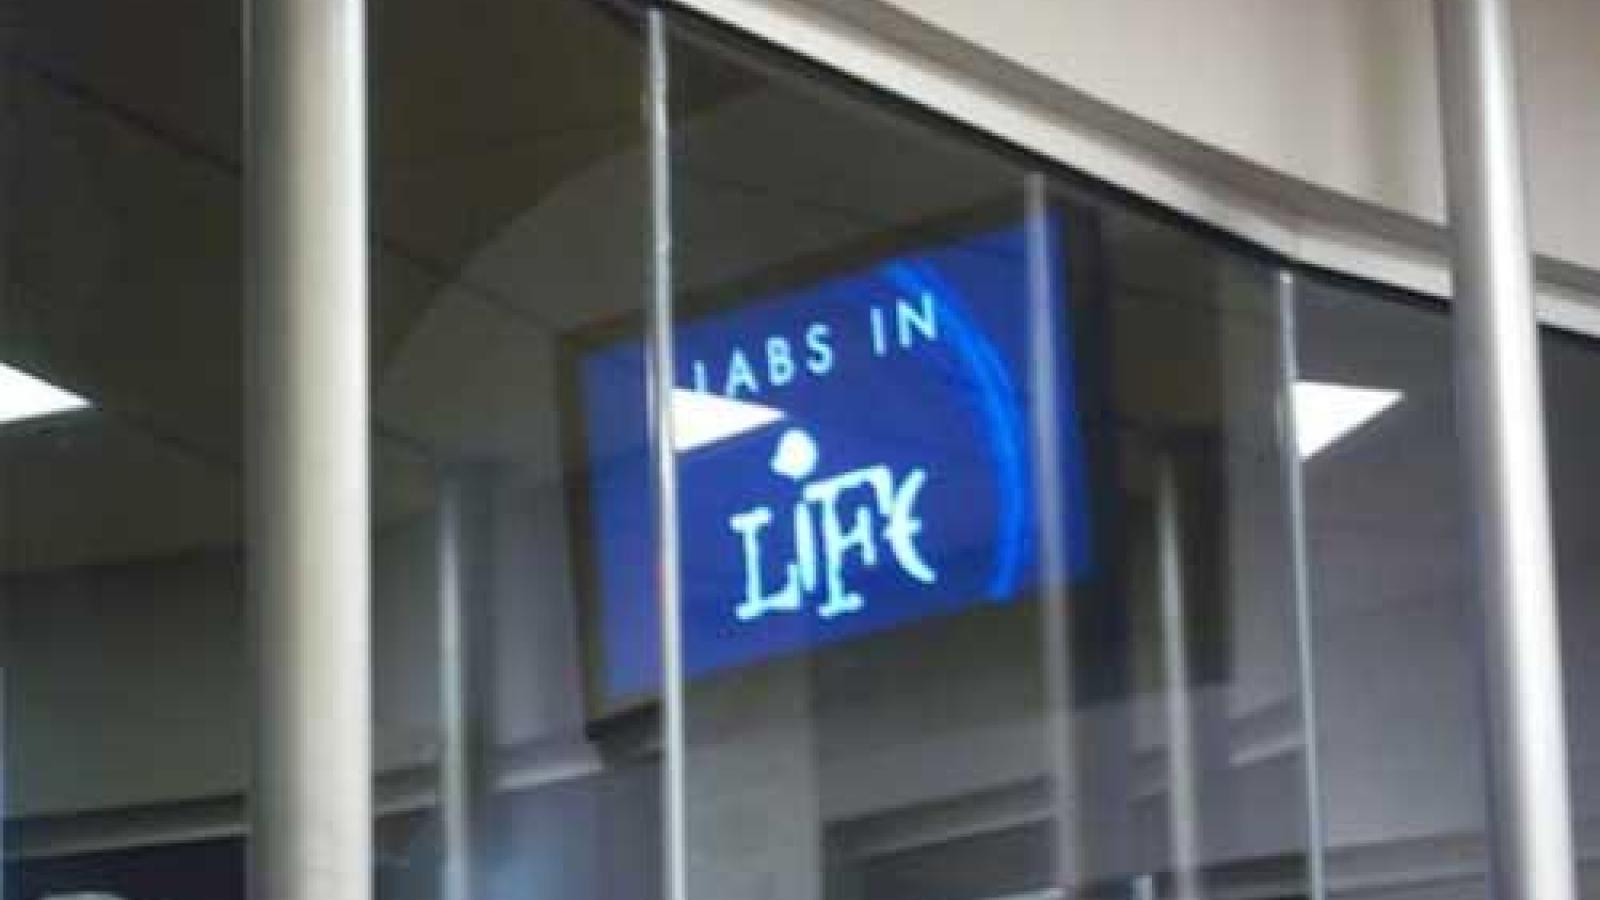 COSI Labs in Life sign in the exhibit (slide 1 of 2)